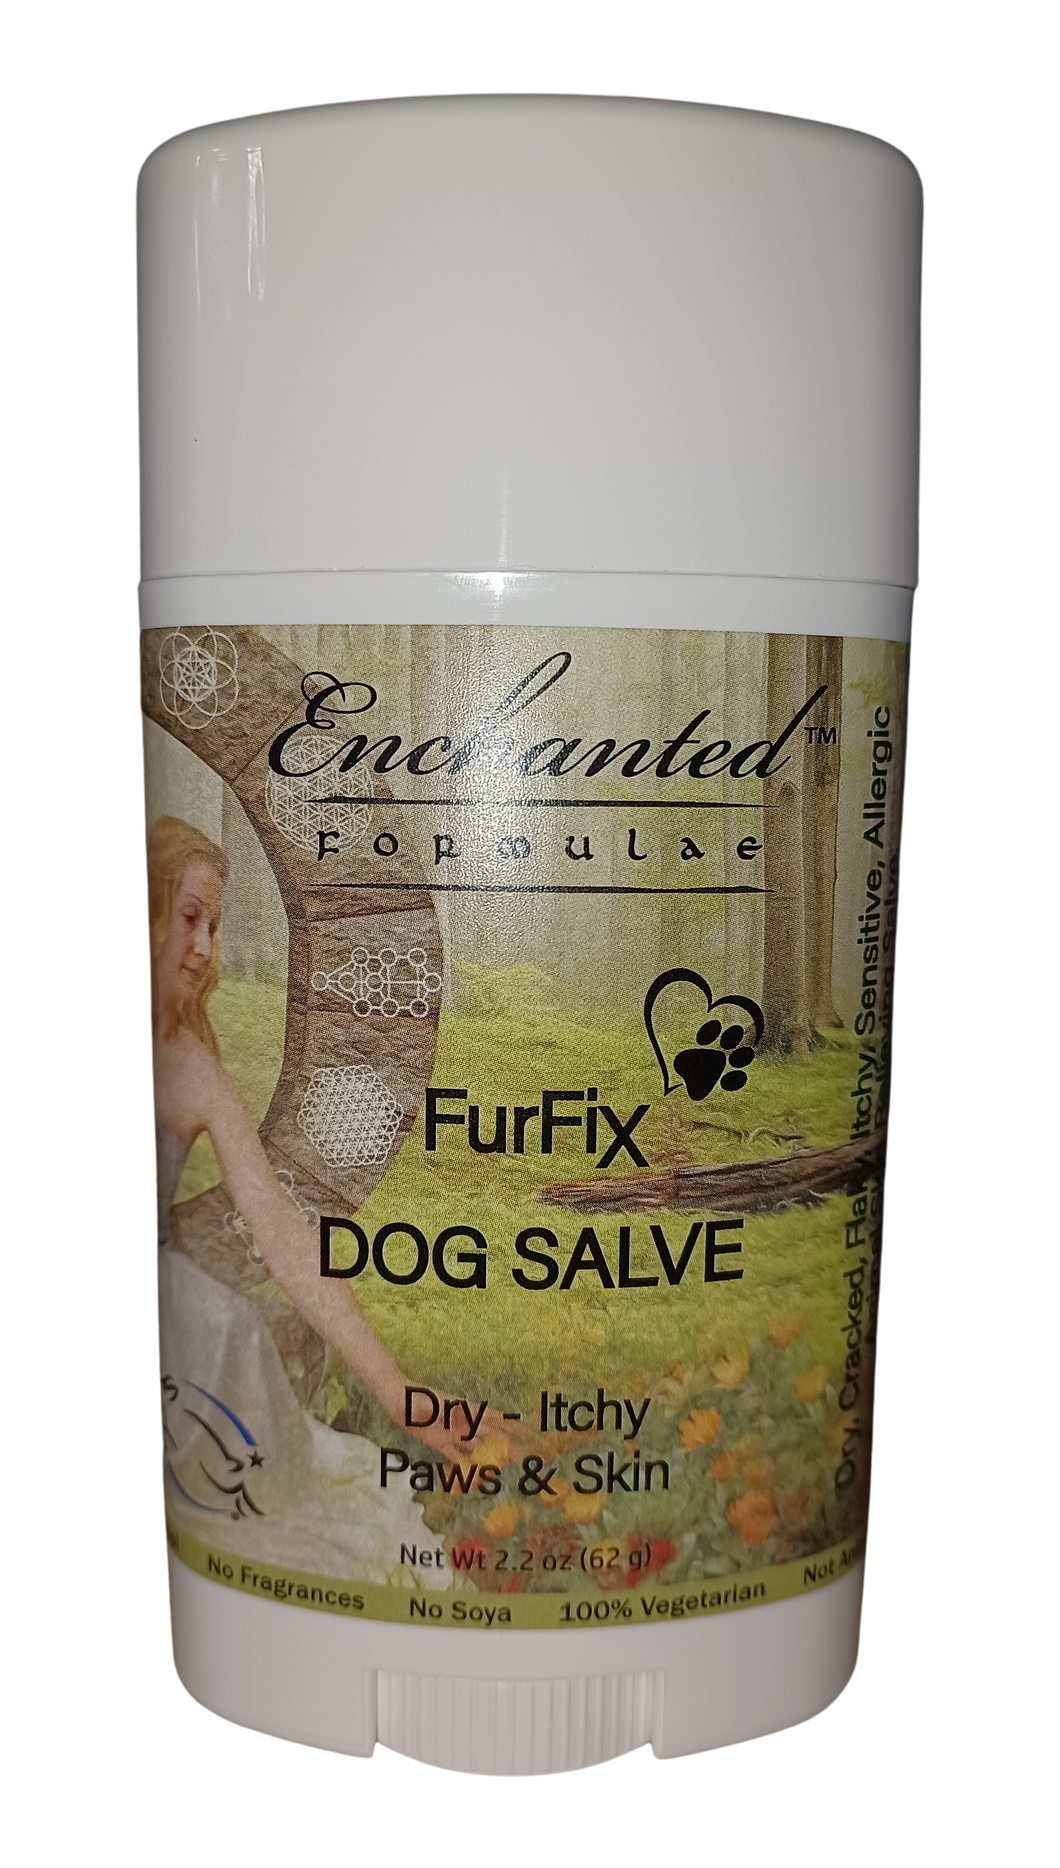 DOG SALVE FOR SKIN & PAWS, FURFIX ITCHY COAT, Dry, Flaky, Itchy, Sensitive or Allergic Animal Skin.